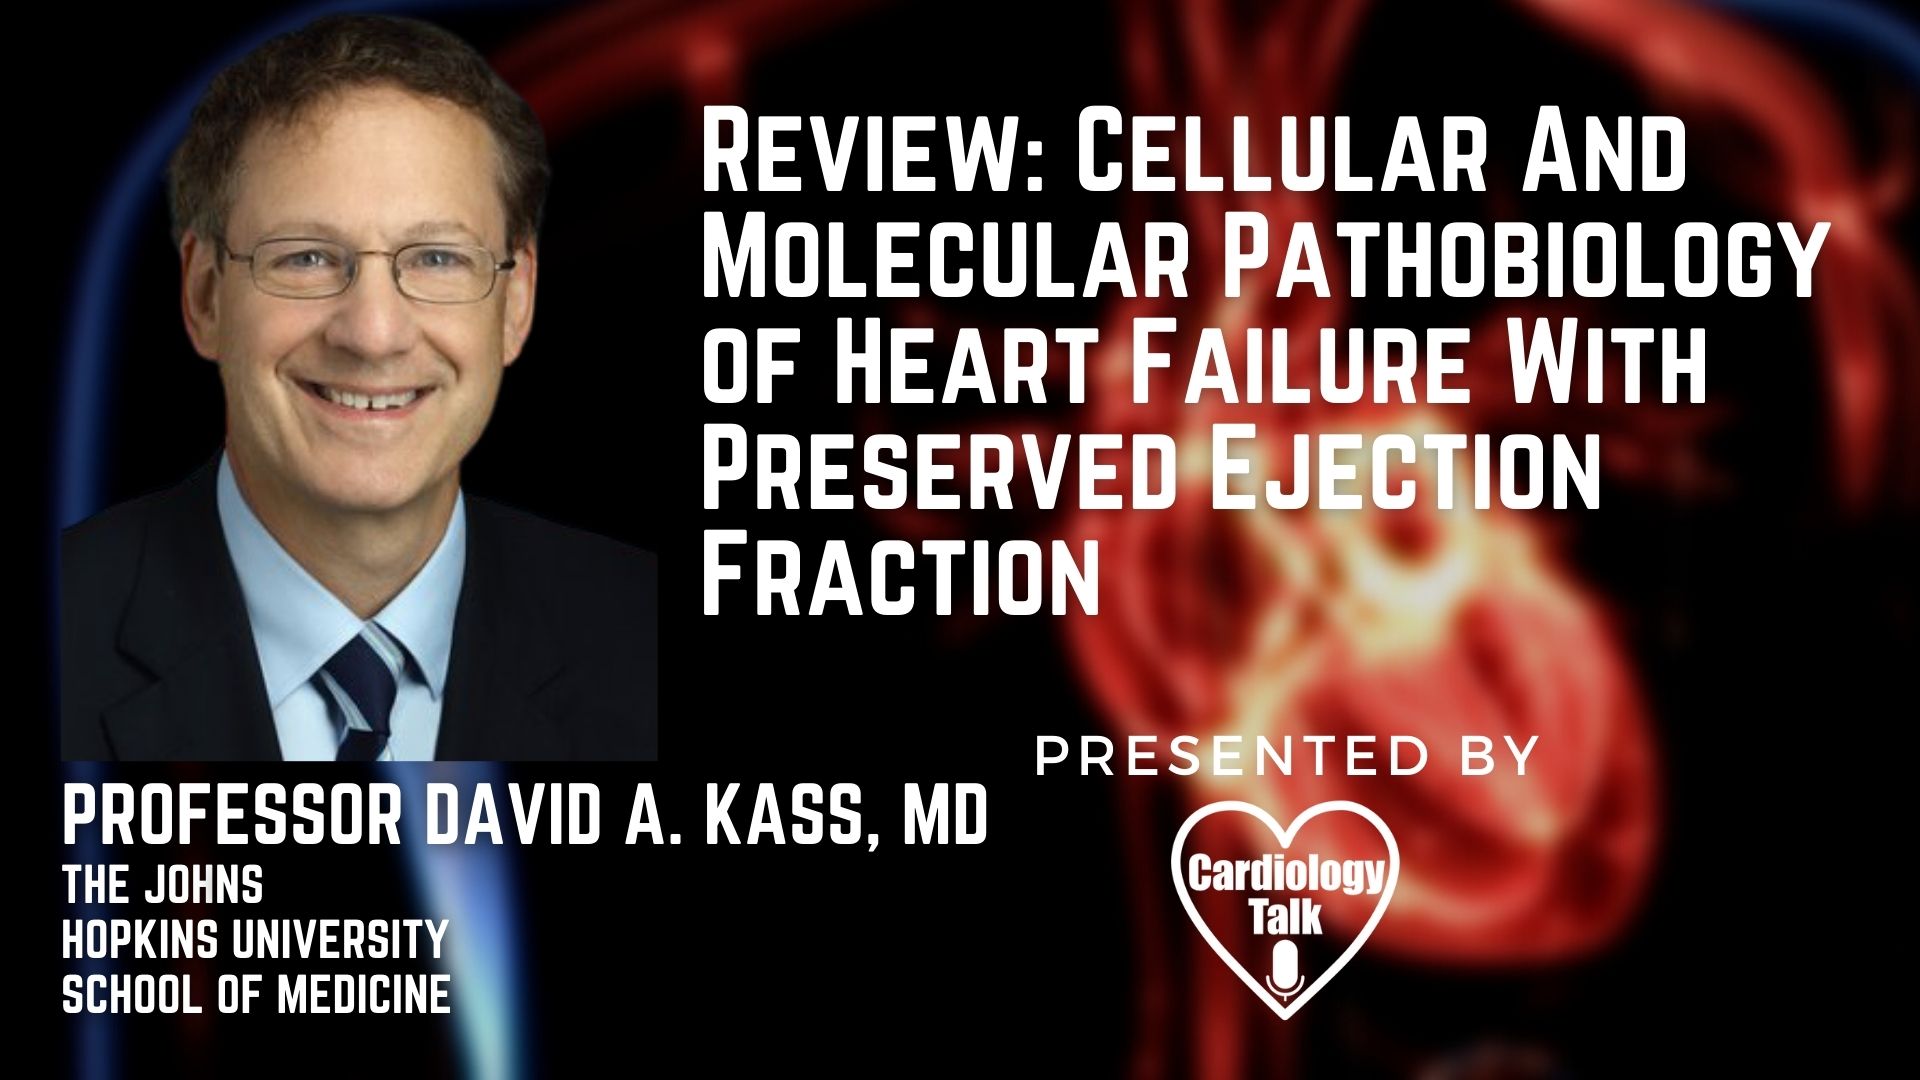 David A. Kass, MD @HopkinsMedicine @hopkinsheart #HFpEF #HeartFailure #Cardiology #Heart #Research Review: Cellular And Molecular Pathobiology of Heart Failure With Preserved Ejection Fra...